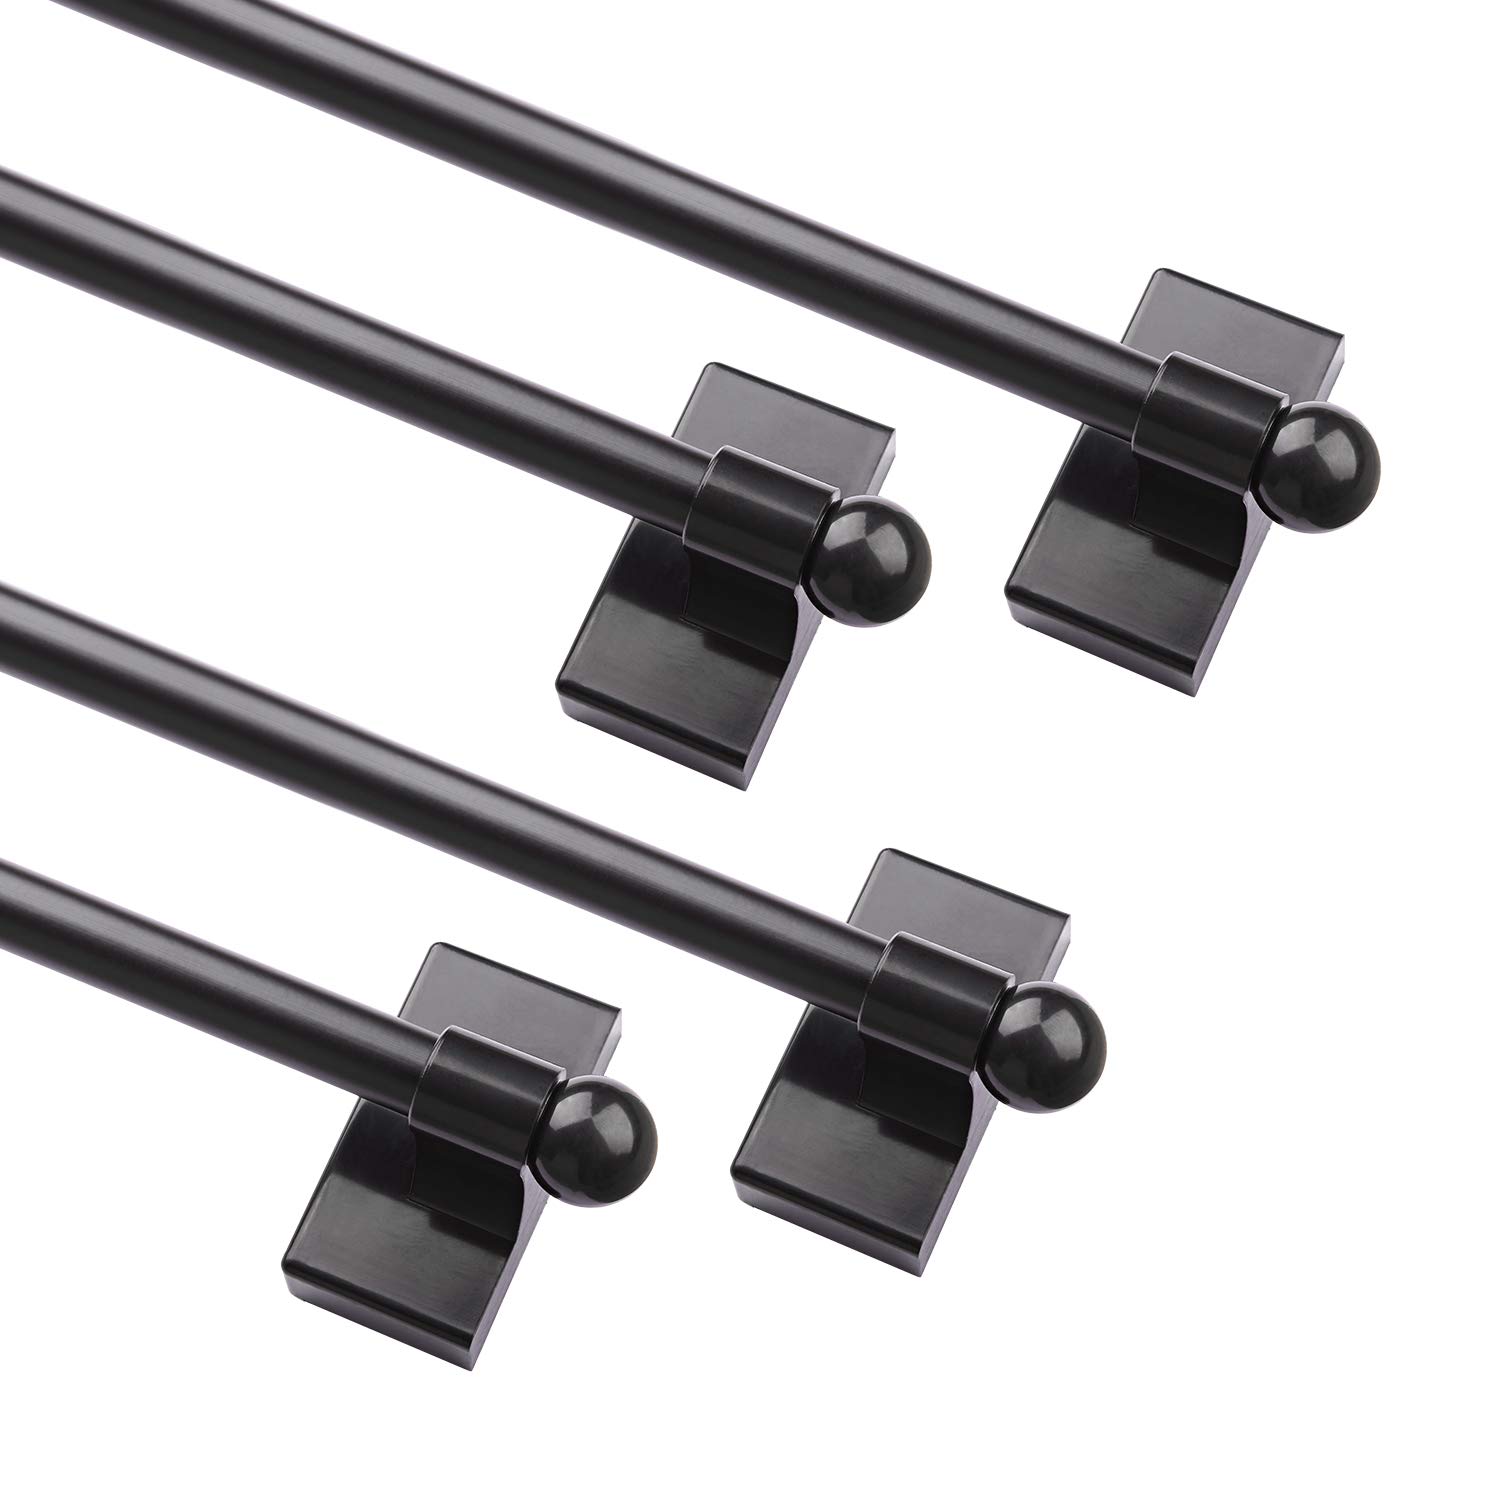 Adjustable Magnetic Rods for Metal Appliance, Doors, Windows,16 to 28 Inch/4 Pack/Easy Installation Toilet Towel Bar, Muti-Useful (Black, 4pack)